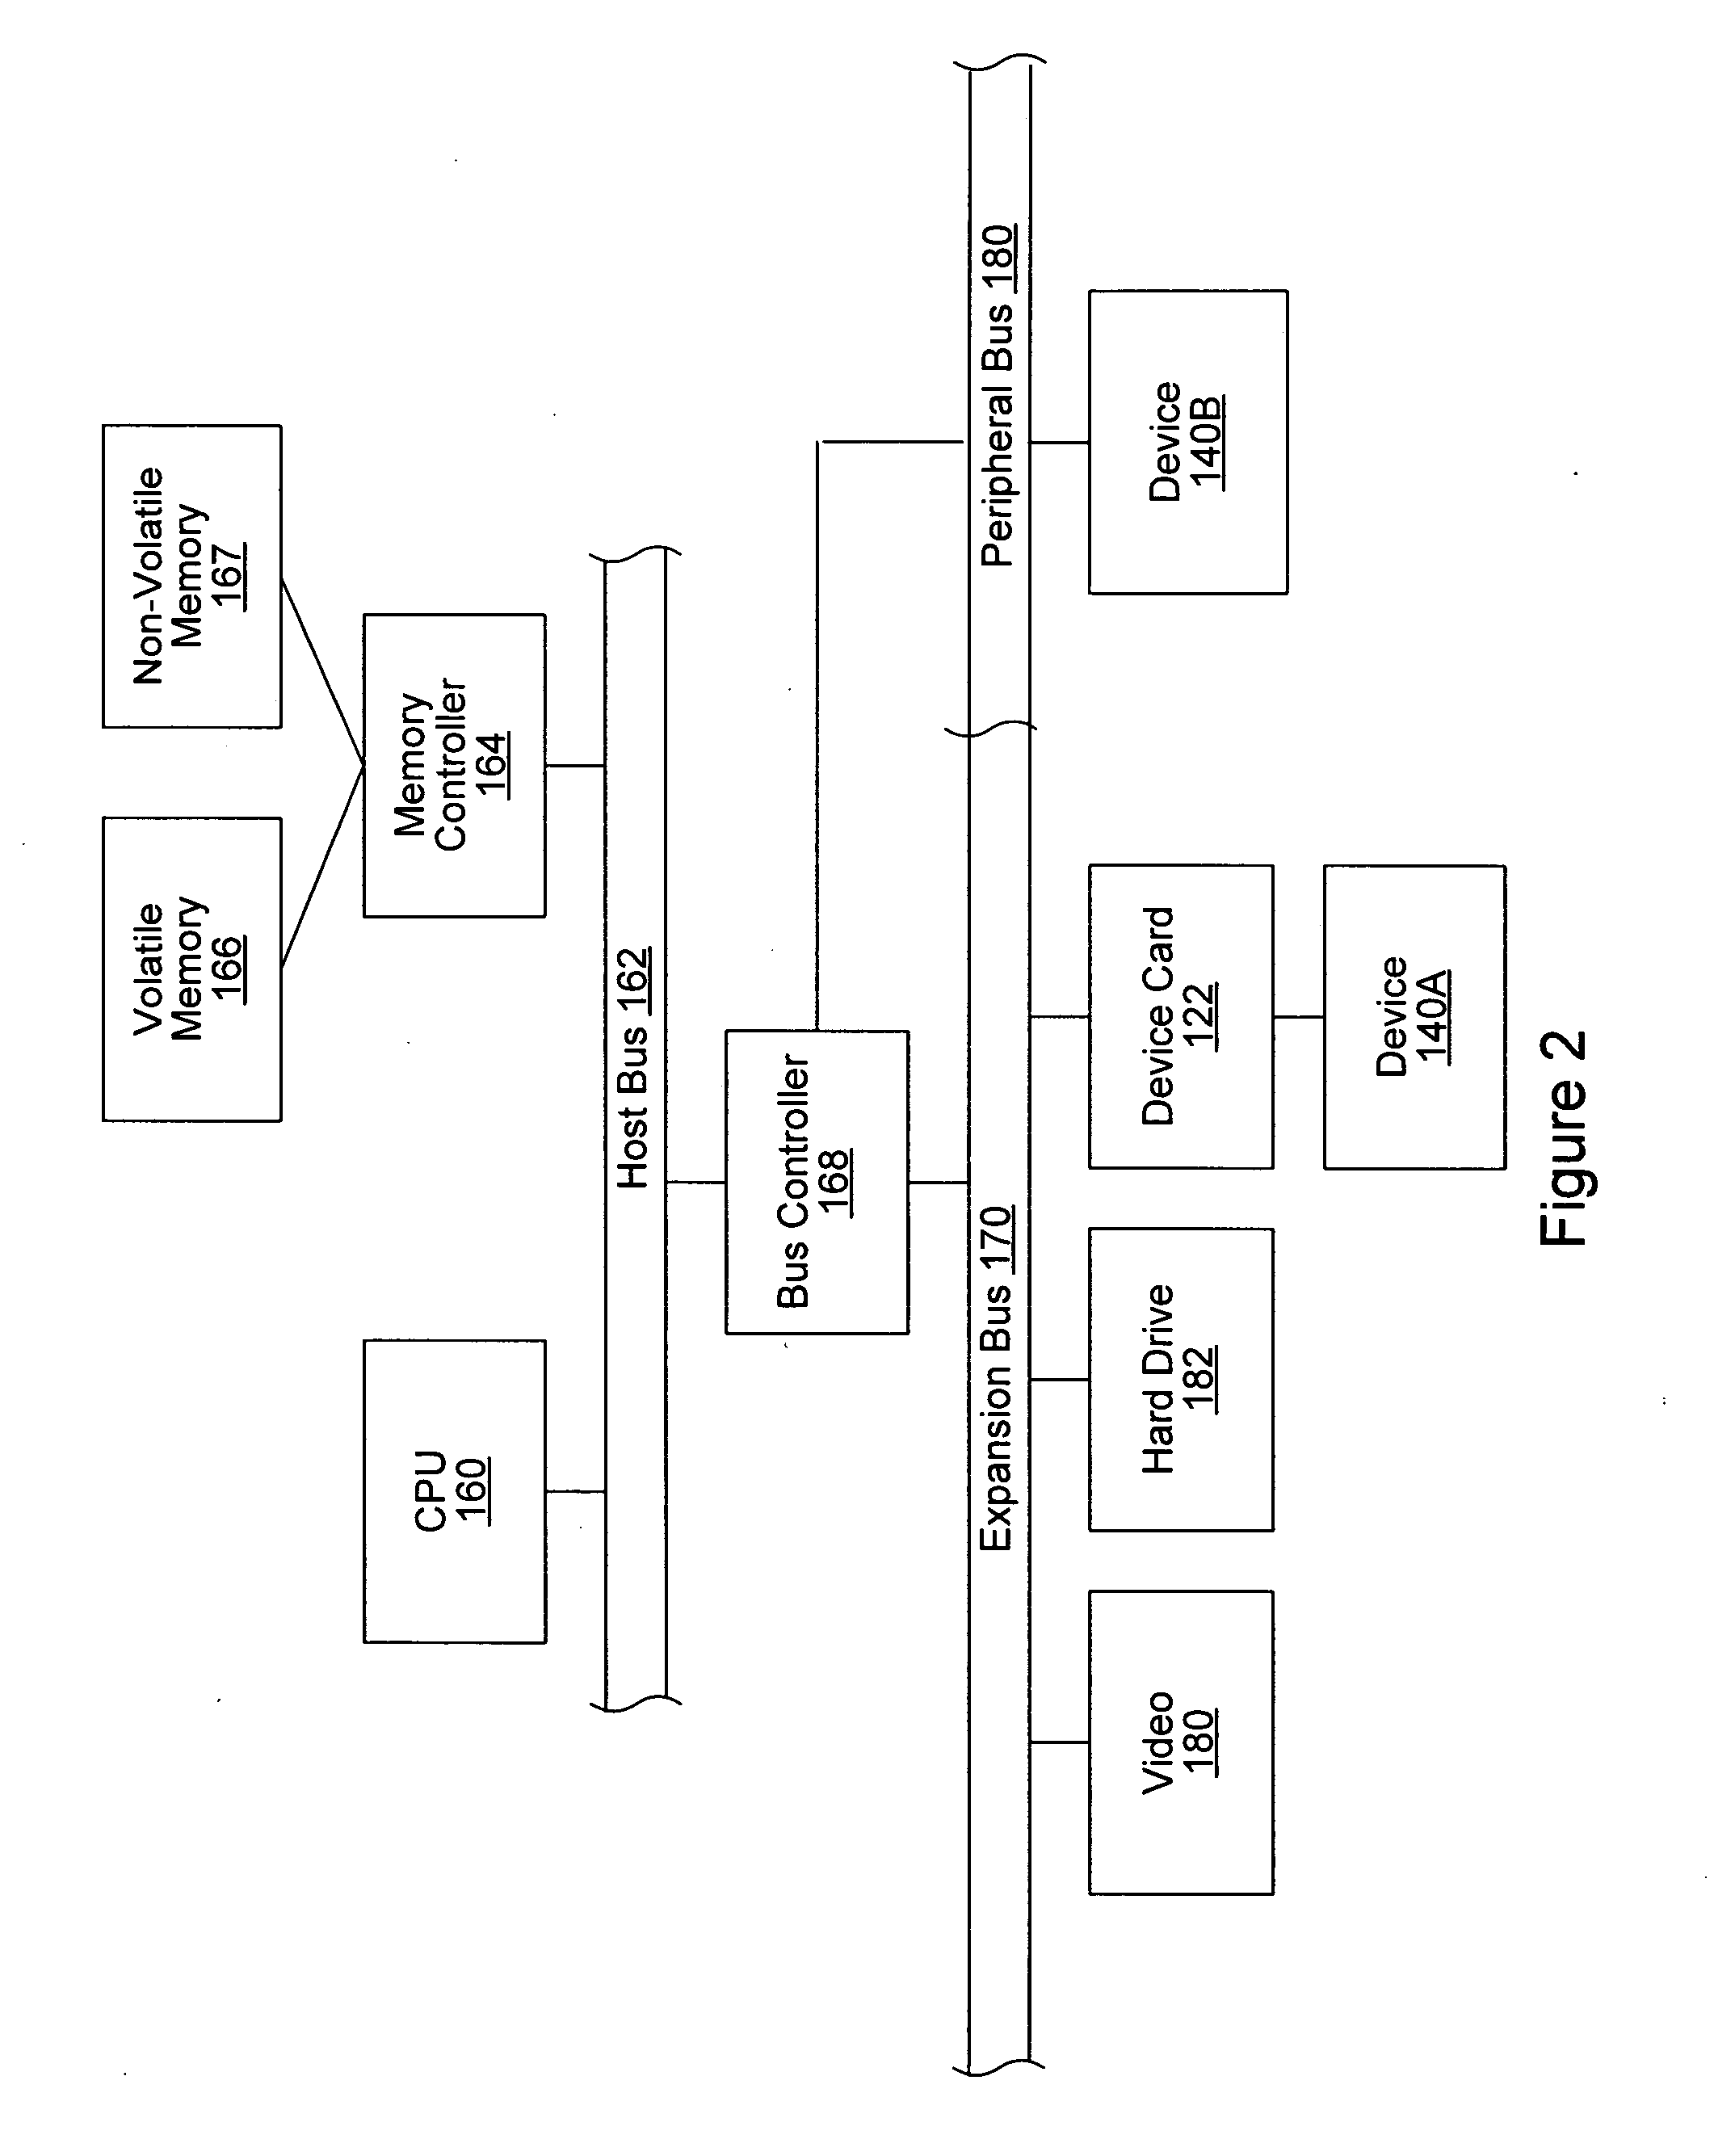 Method for implementing a counter in a memory with increased memory efficiency